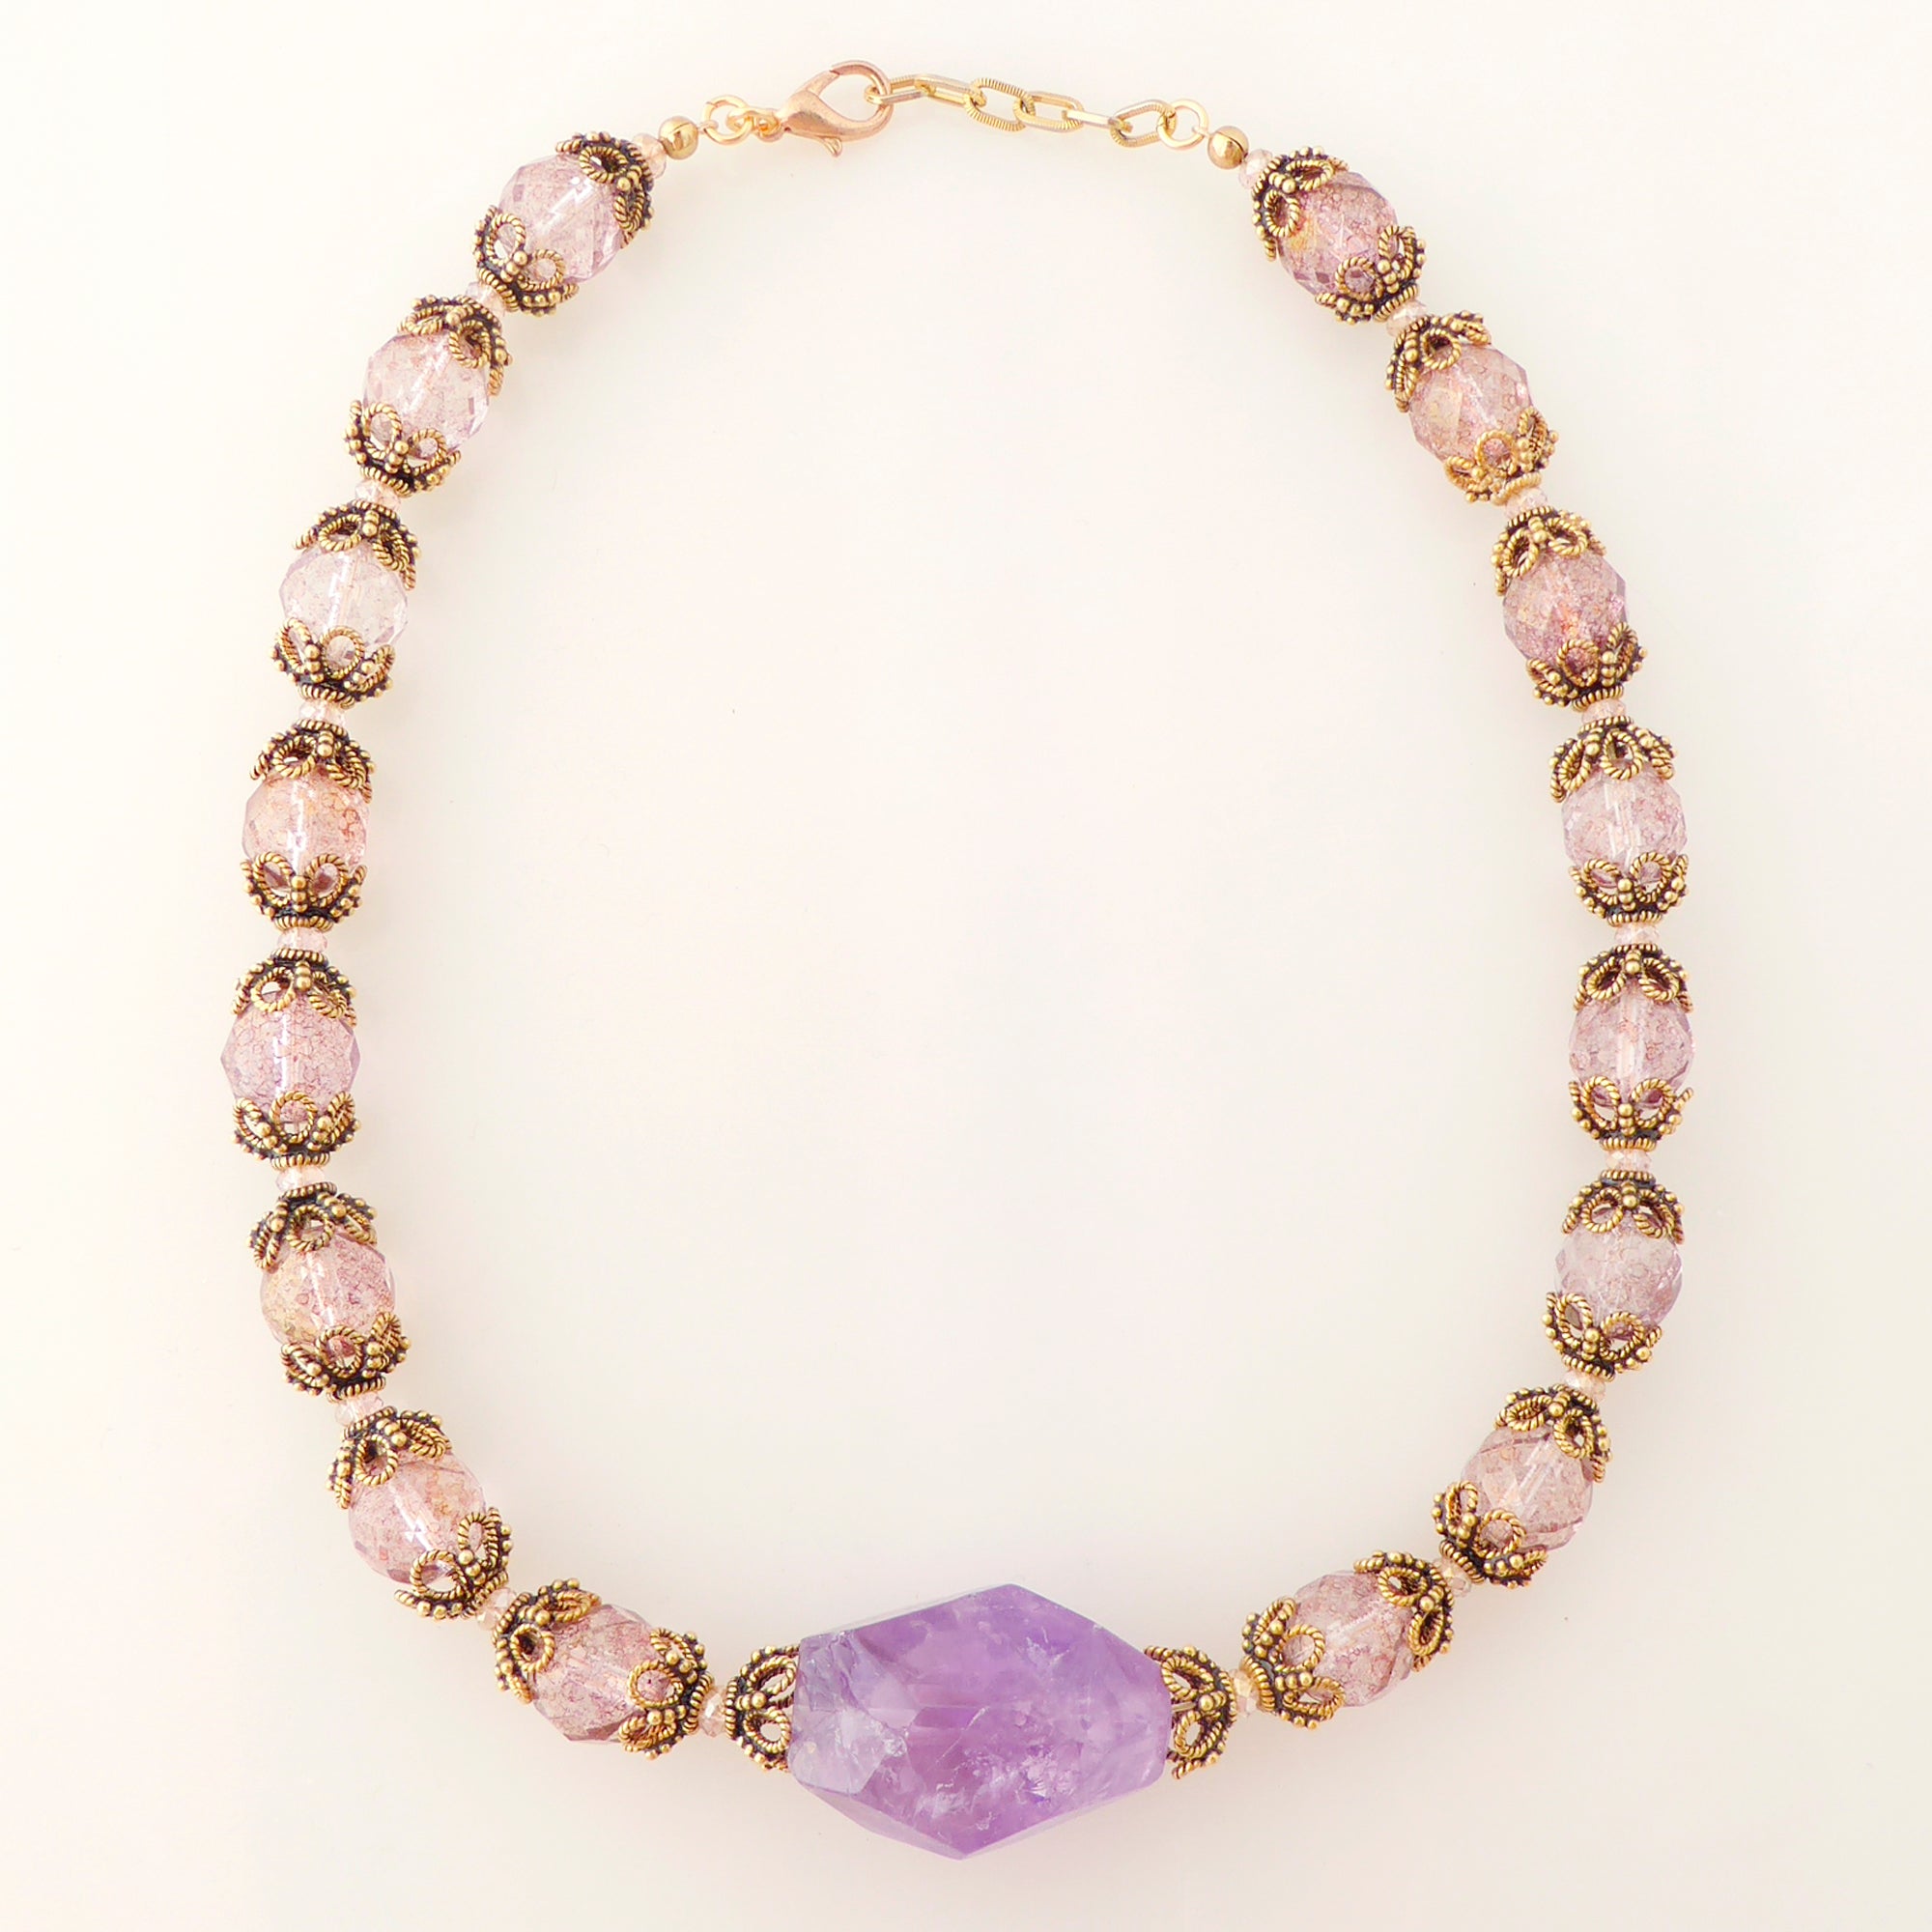 Amethyst rococo necklace by Jenny Dayco 6